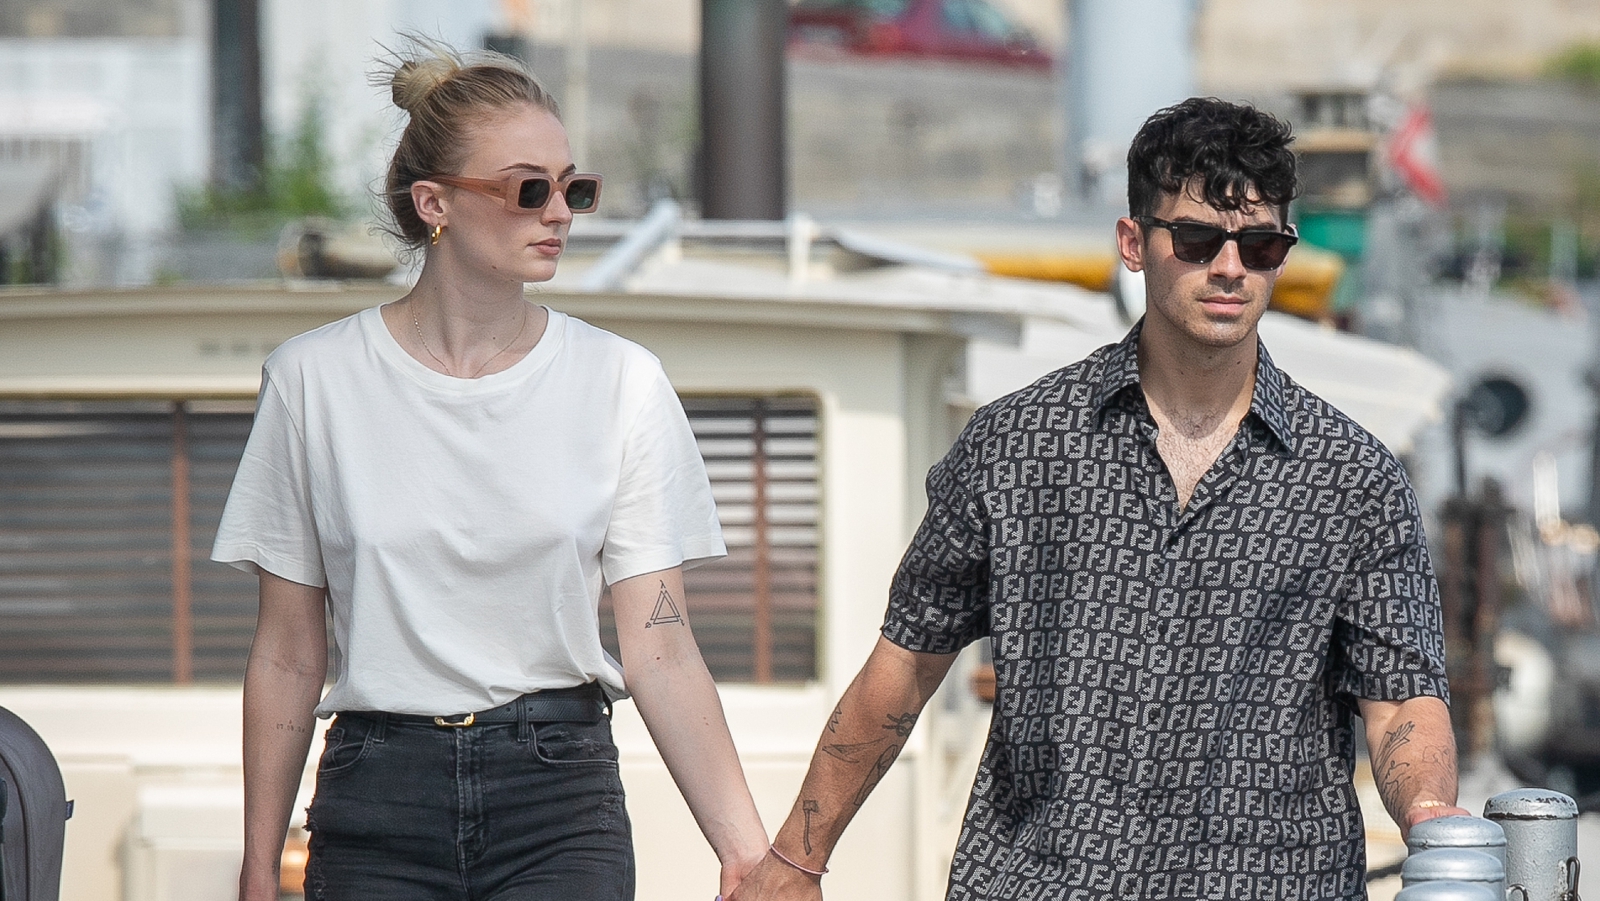 Joe Jonas And Sophie Turner Match In Red As Guests Wear White At